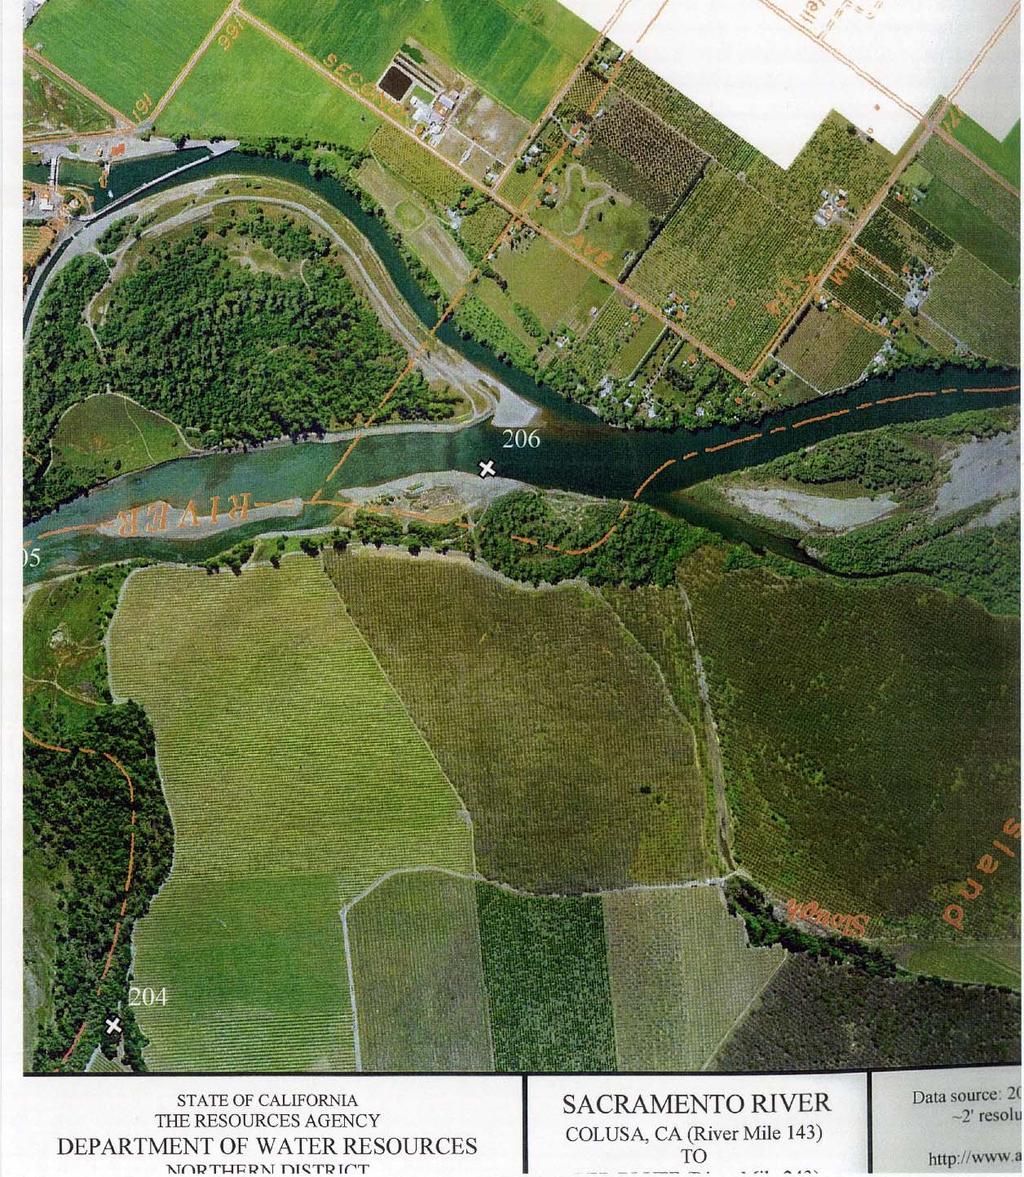 Glenn Colusa Irrigation District completed a Sacramento River project in 2002-2003.